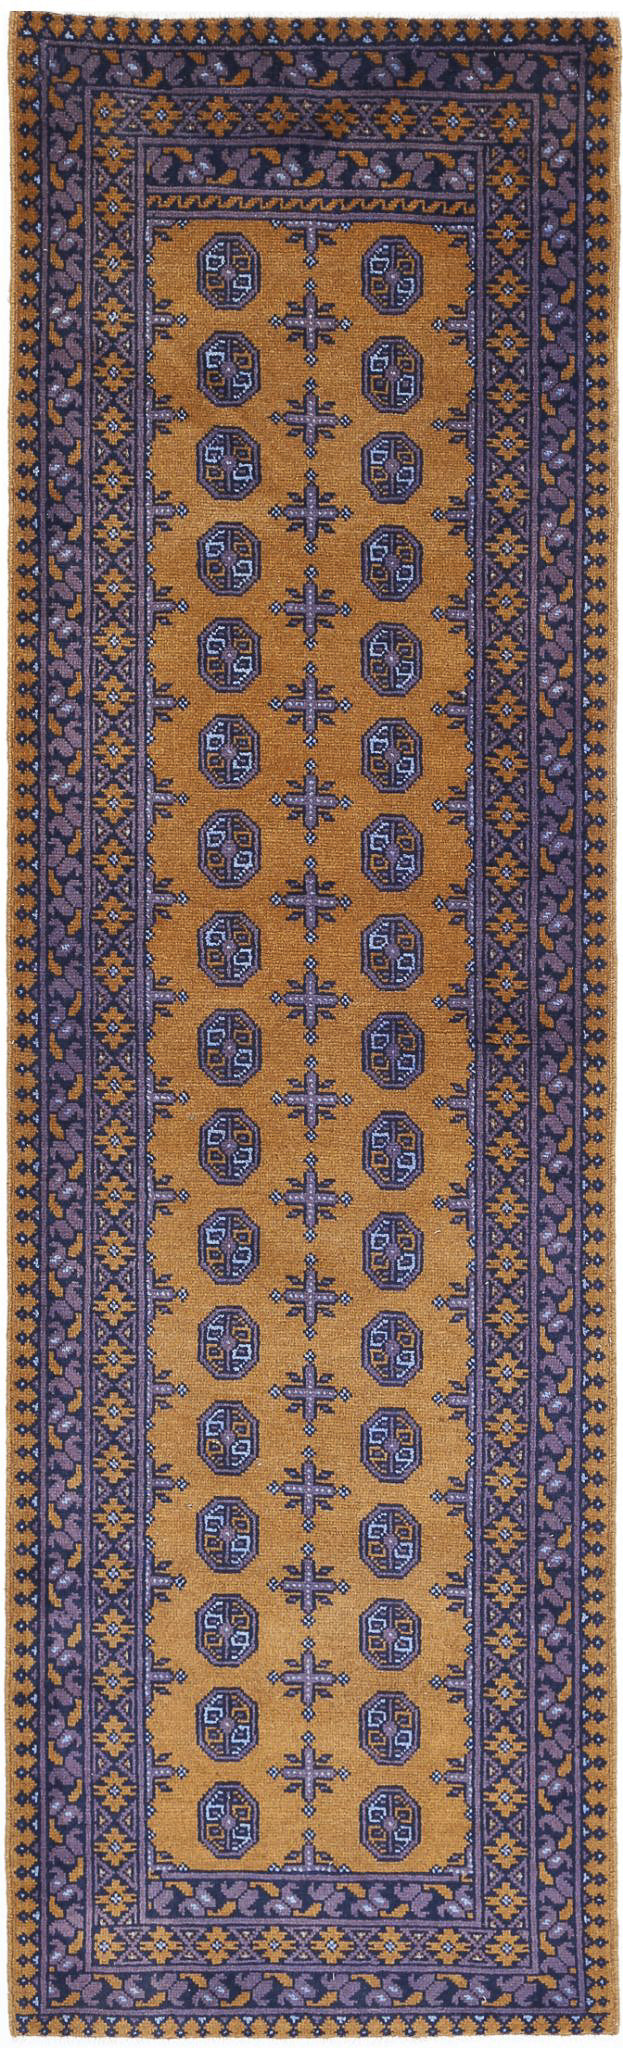 Revival-hand-knotted-gul-collection-wool-rug-5013993.jpg